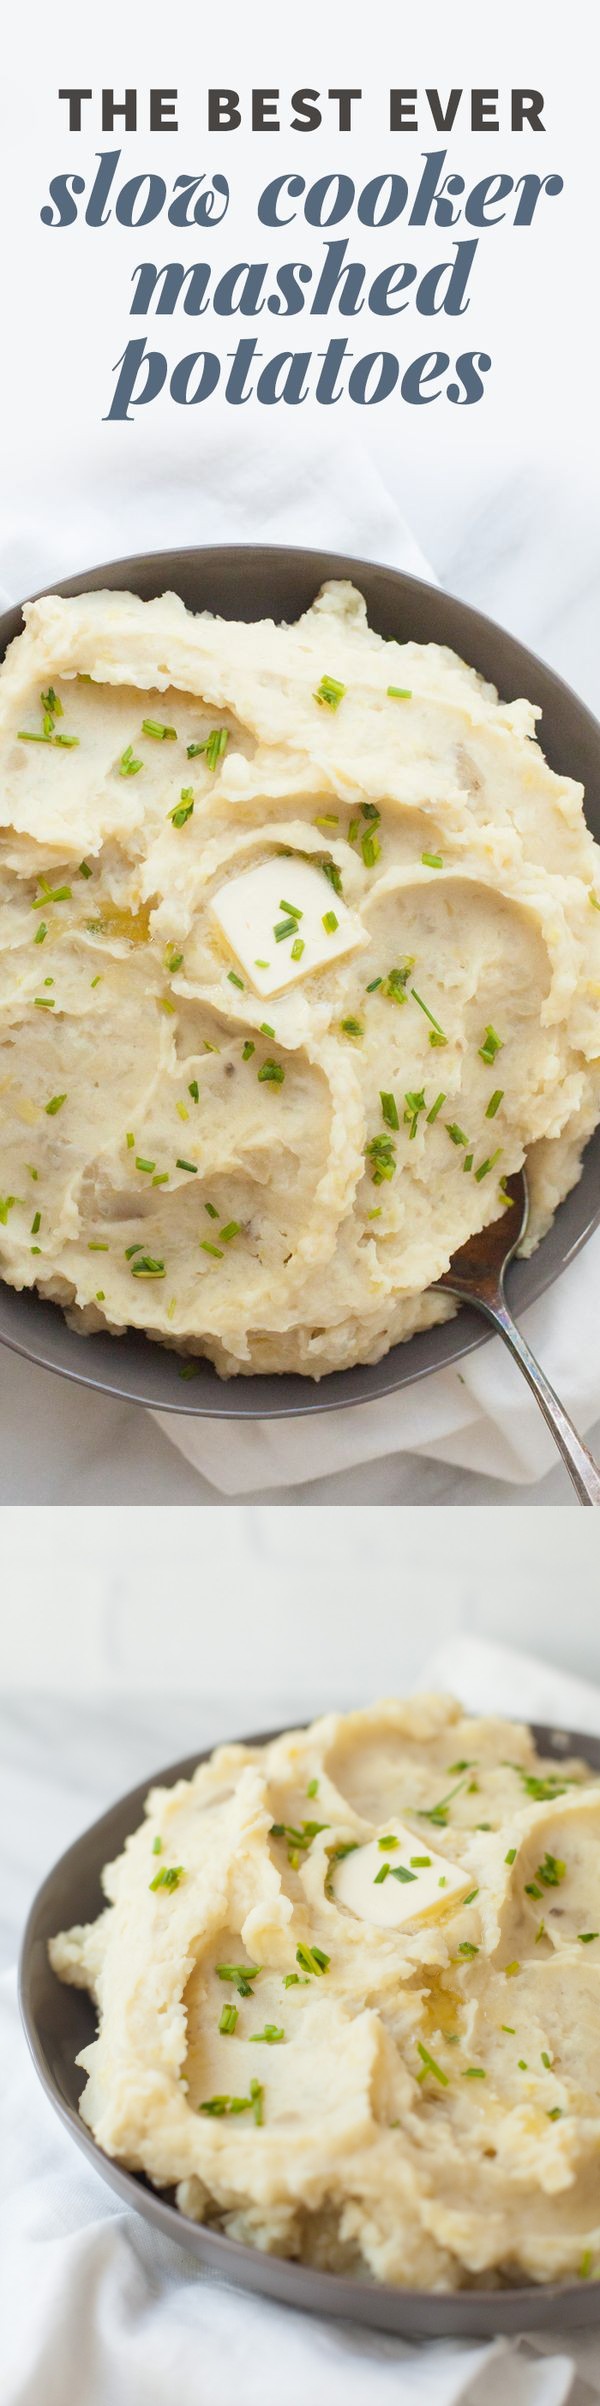 The Best Ever Slow Cooker Mashed Potatoes